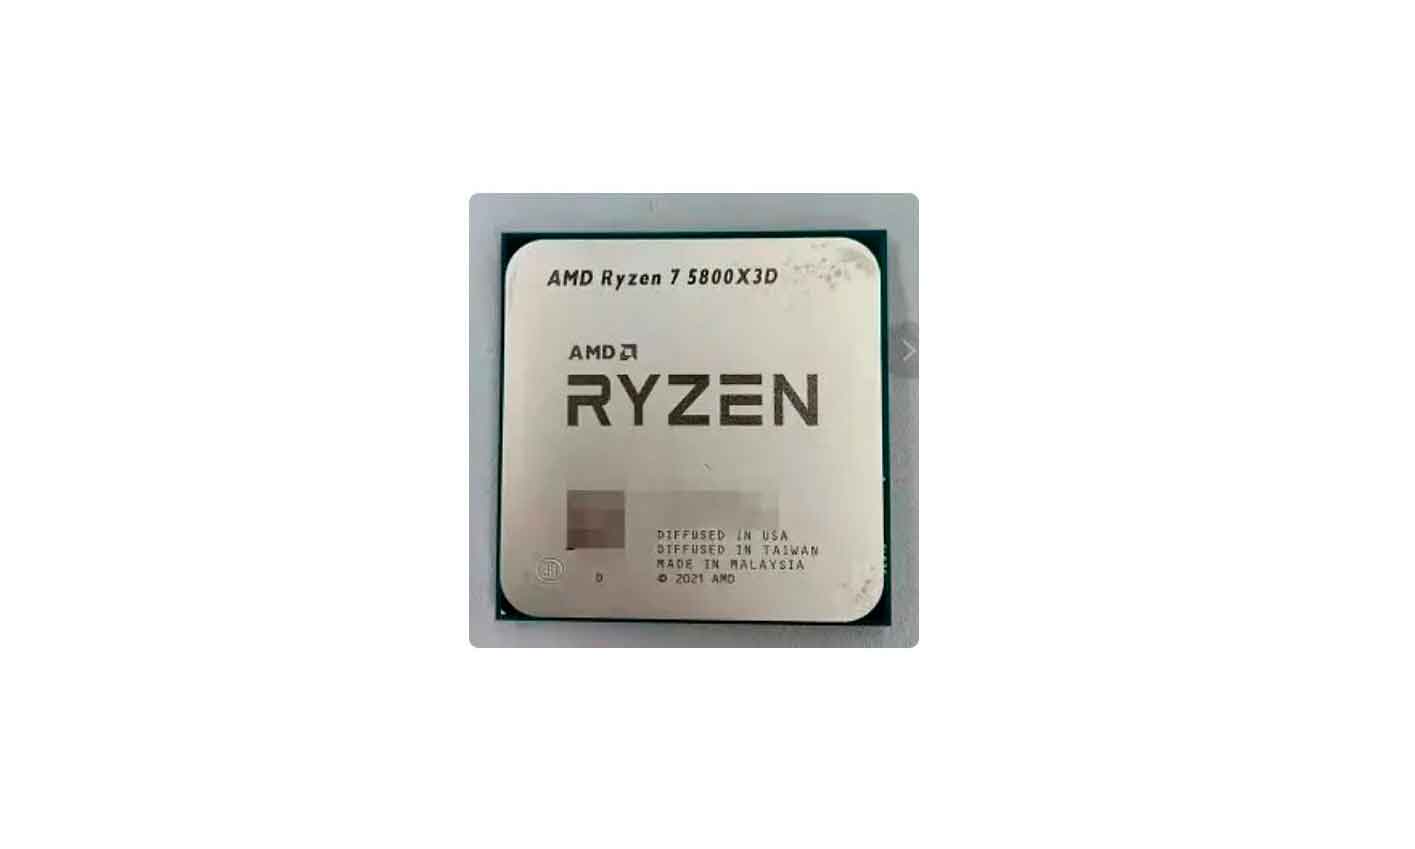 It seems that the AMD Ryzen 7 5800X3D will not be able to be overclocked